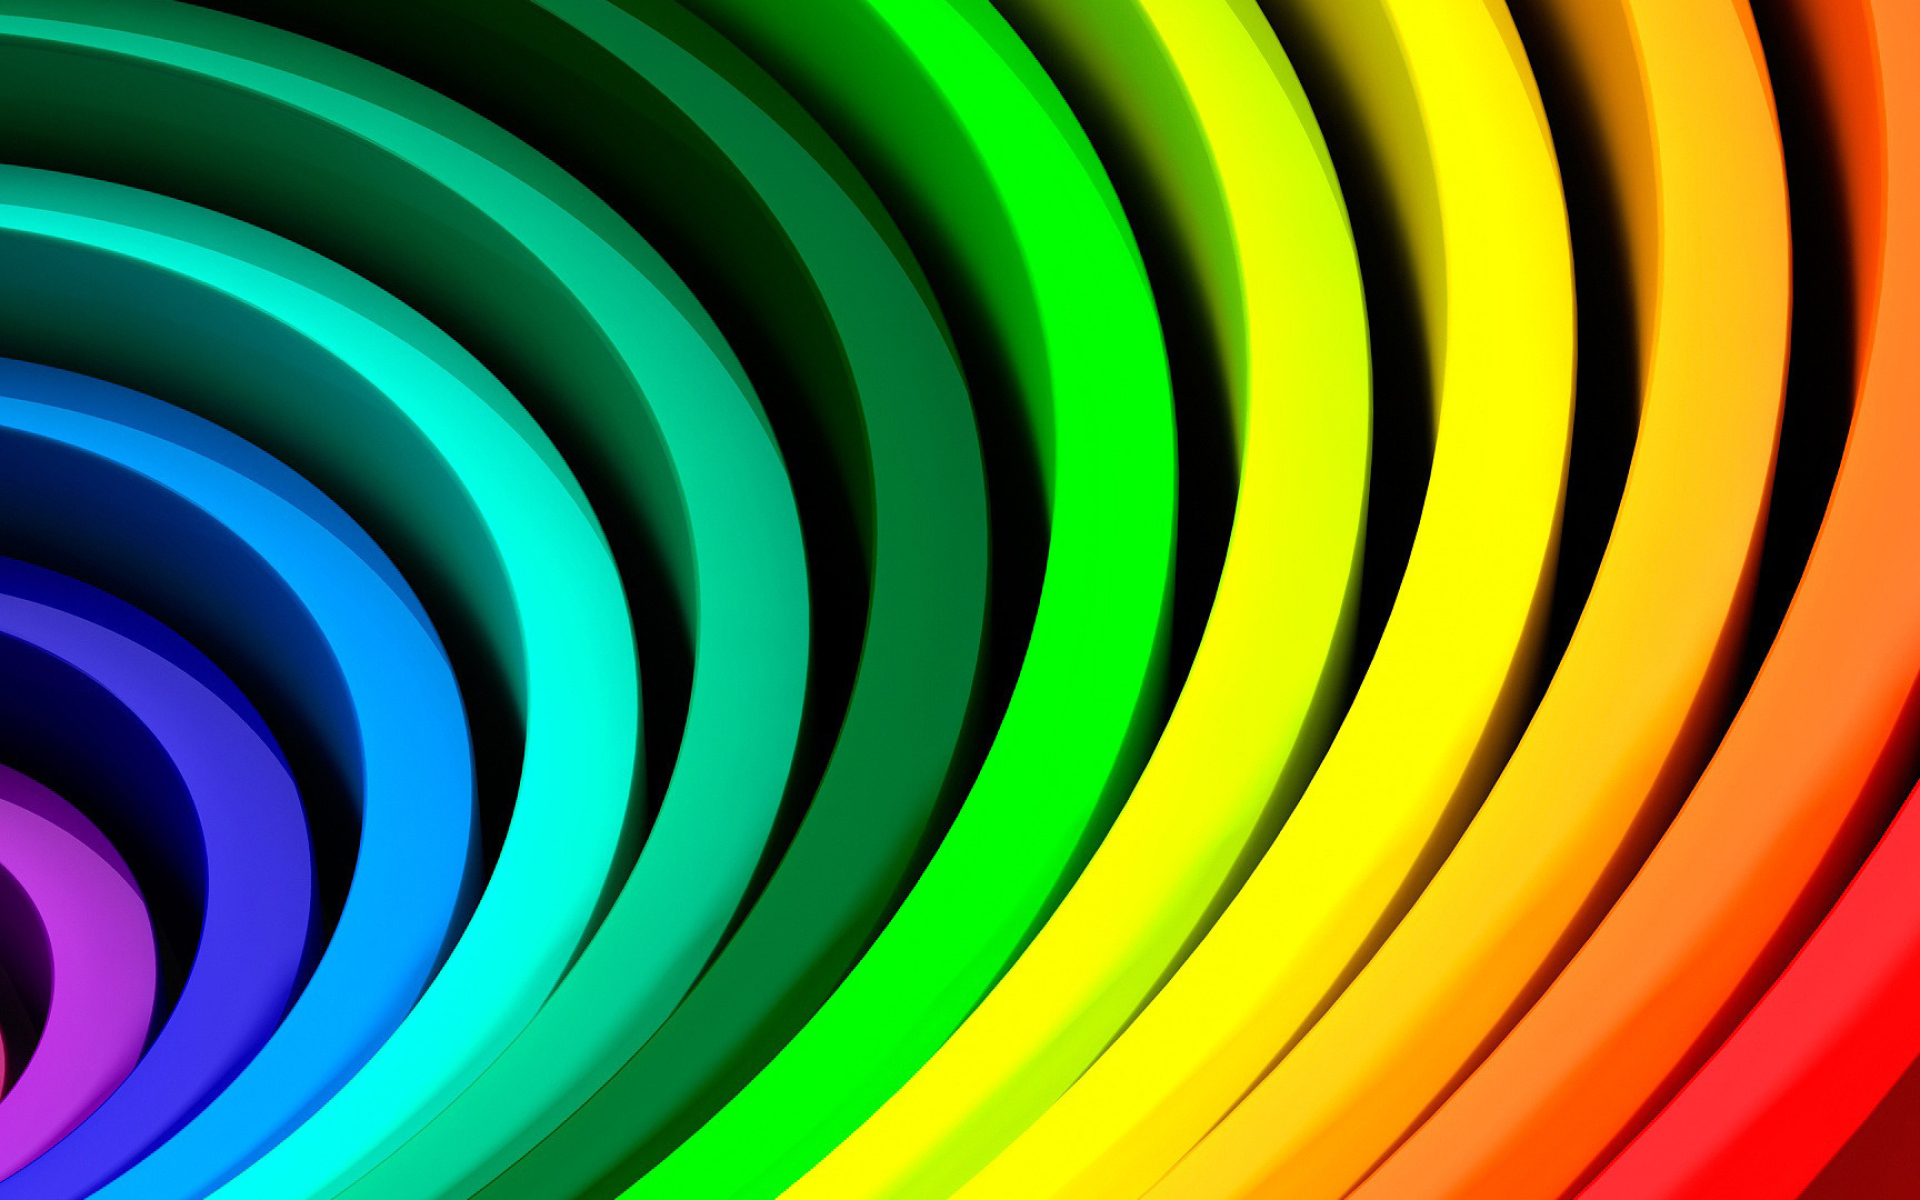 3D rainbow wallpapers, Depth and dimension, Multicolored visuals, Eye-catching designs, 1920x1200 HD Desktop